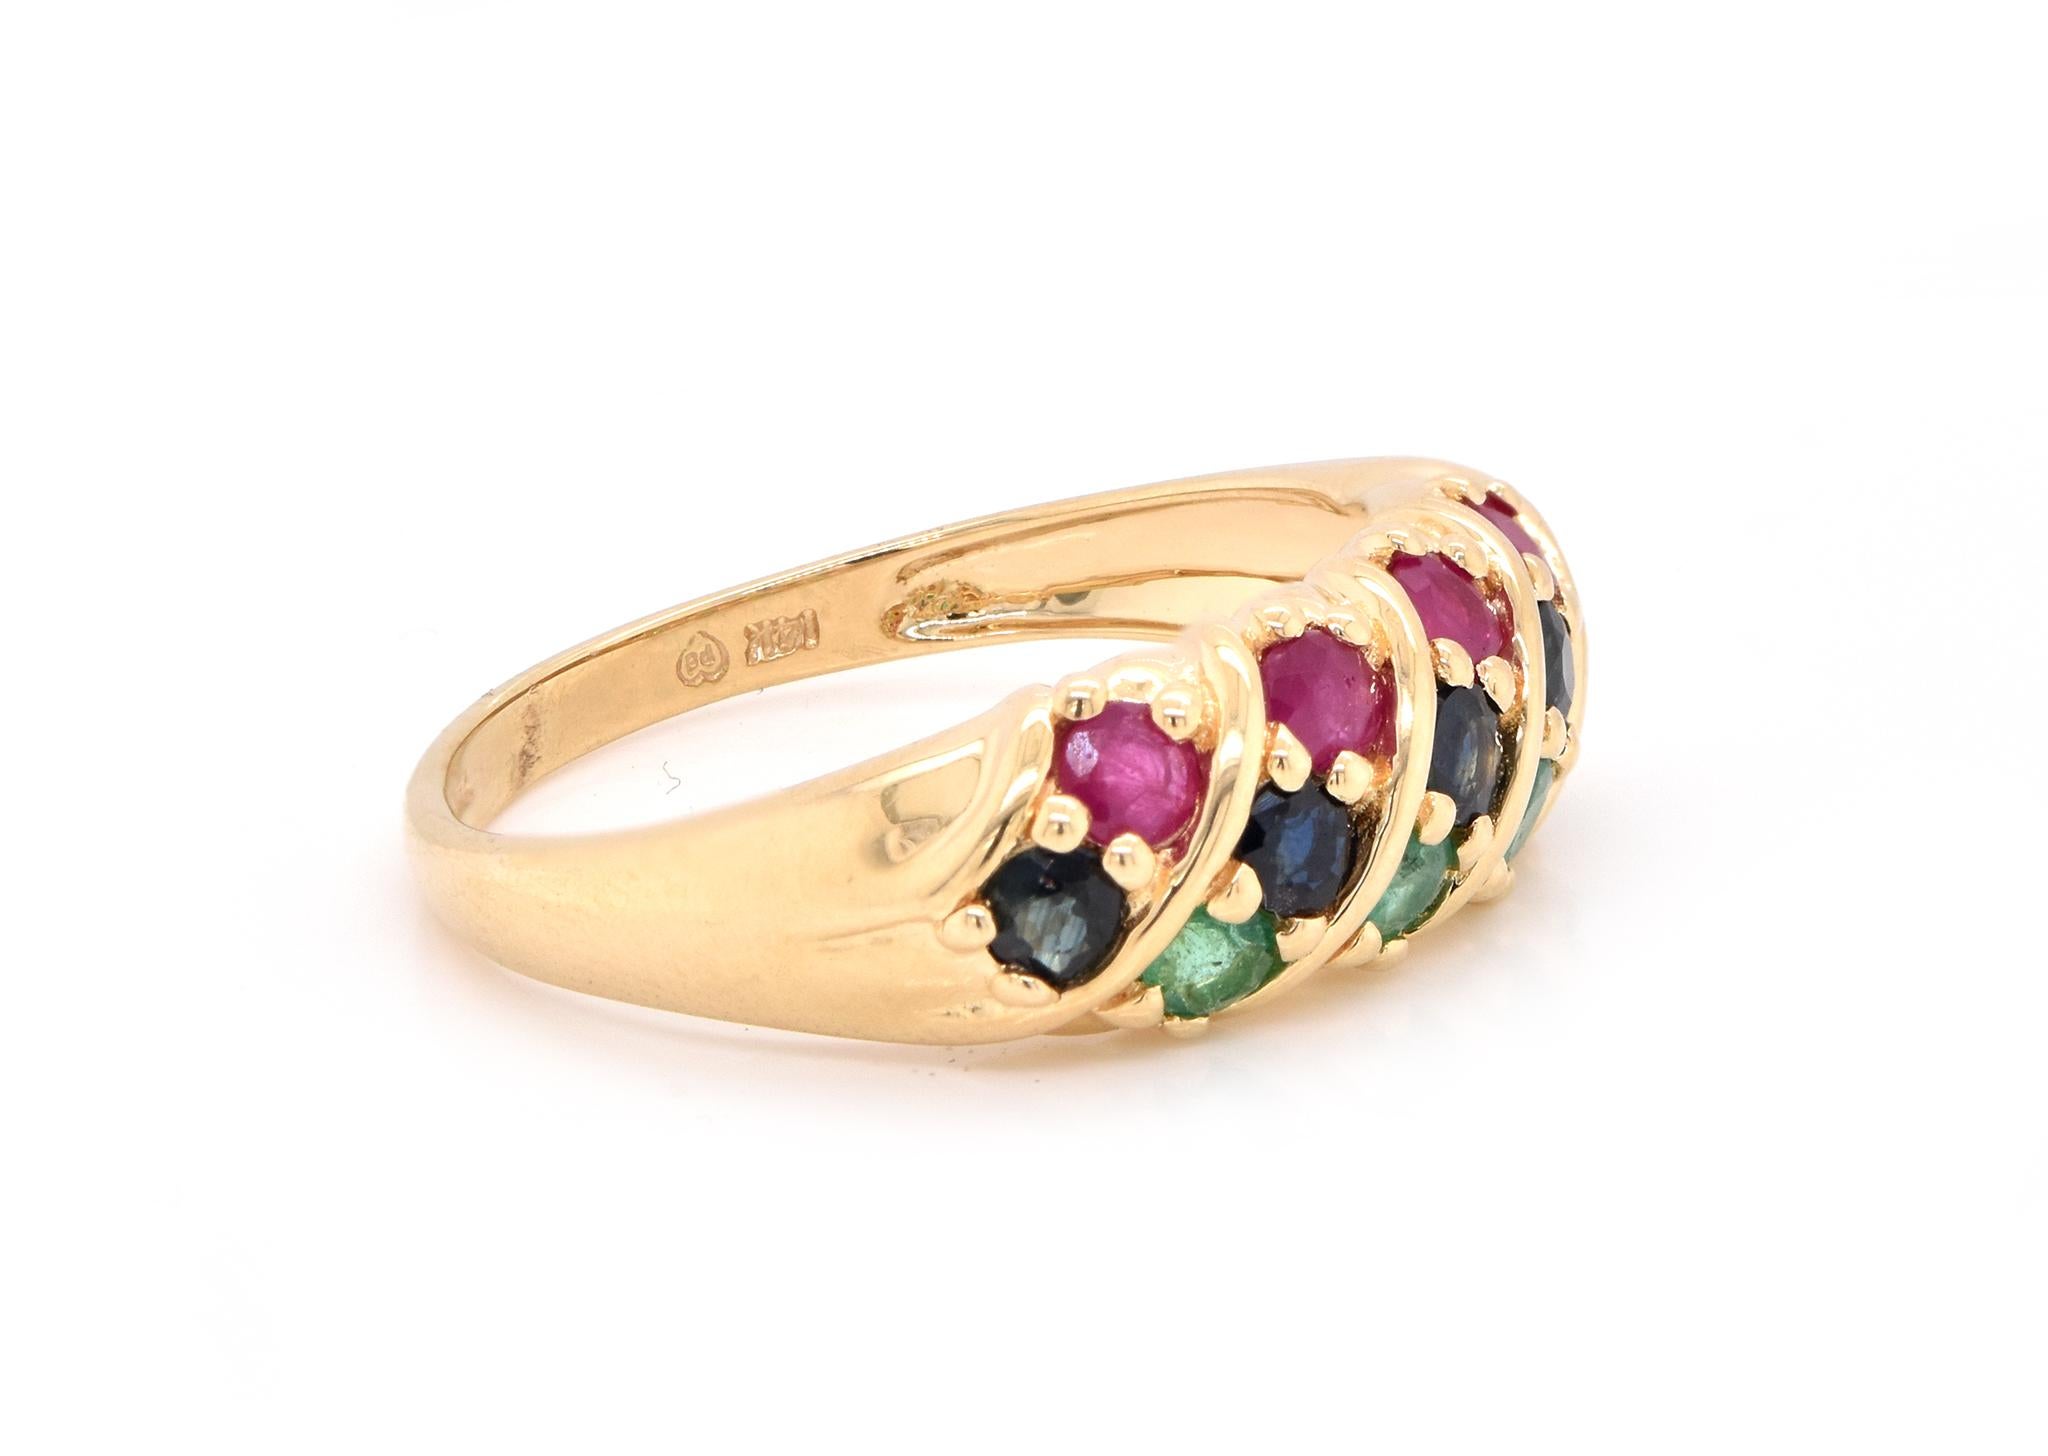 Material: 14K yellow gold 
Sapphire: 5 round cut = .35cttw
Emerald: 4 round cut = .20cttw
Ruby: 4 round cut = .35cttw
Ring Size: 10 (please allow up to 2 additional business days for sizing requests)
Dimensions: ring top measures 9.11mm wide
Weight: